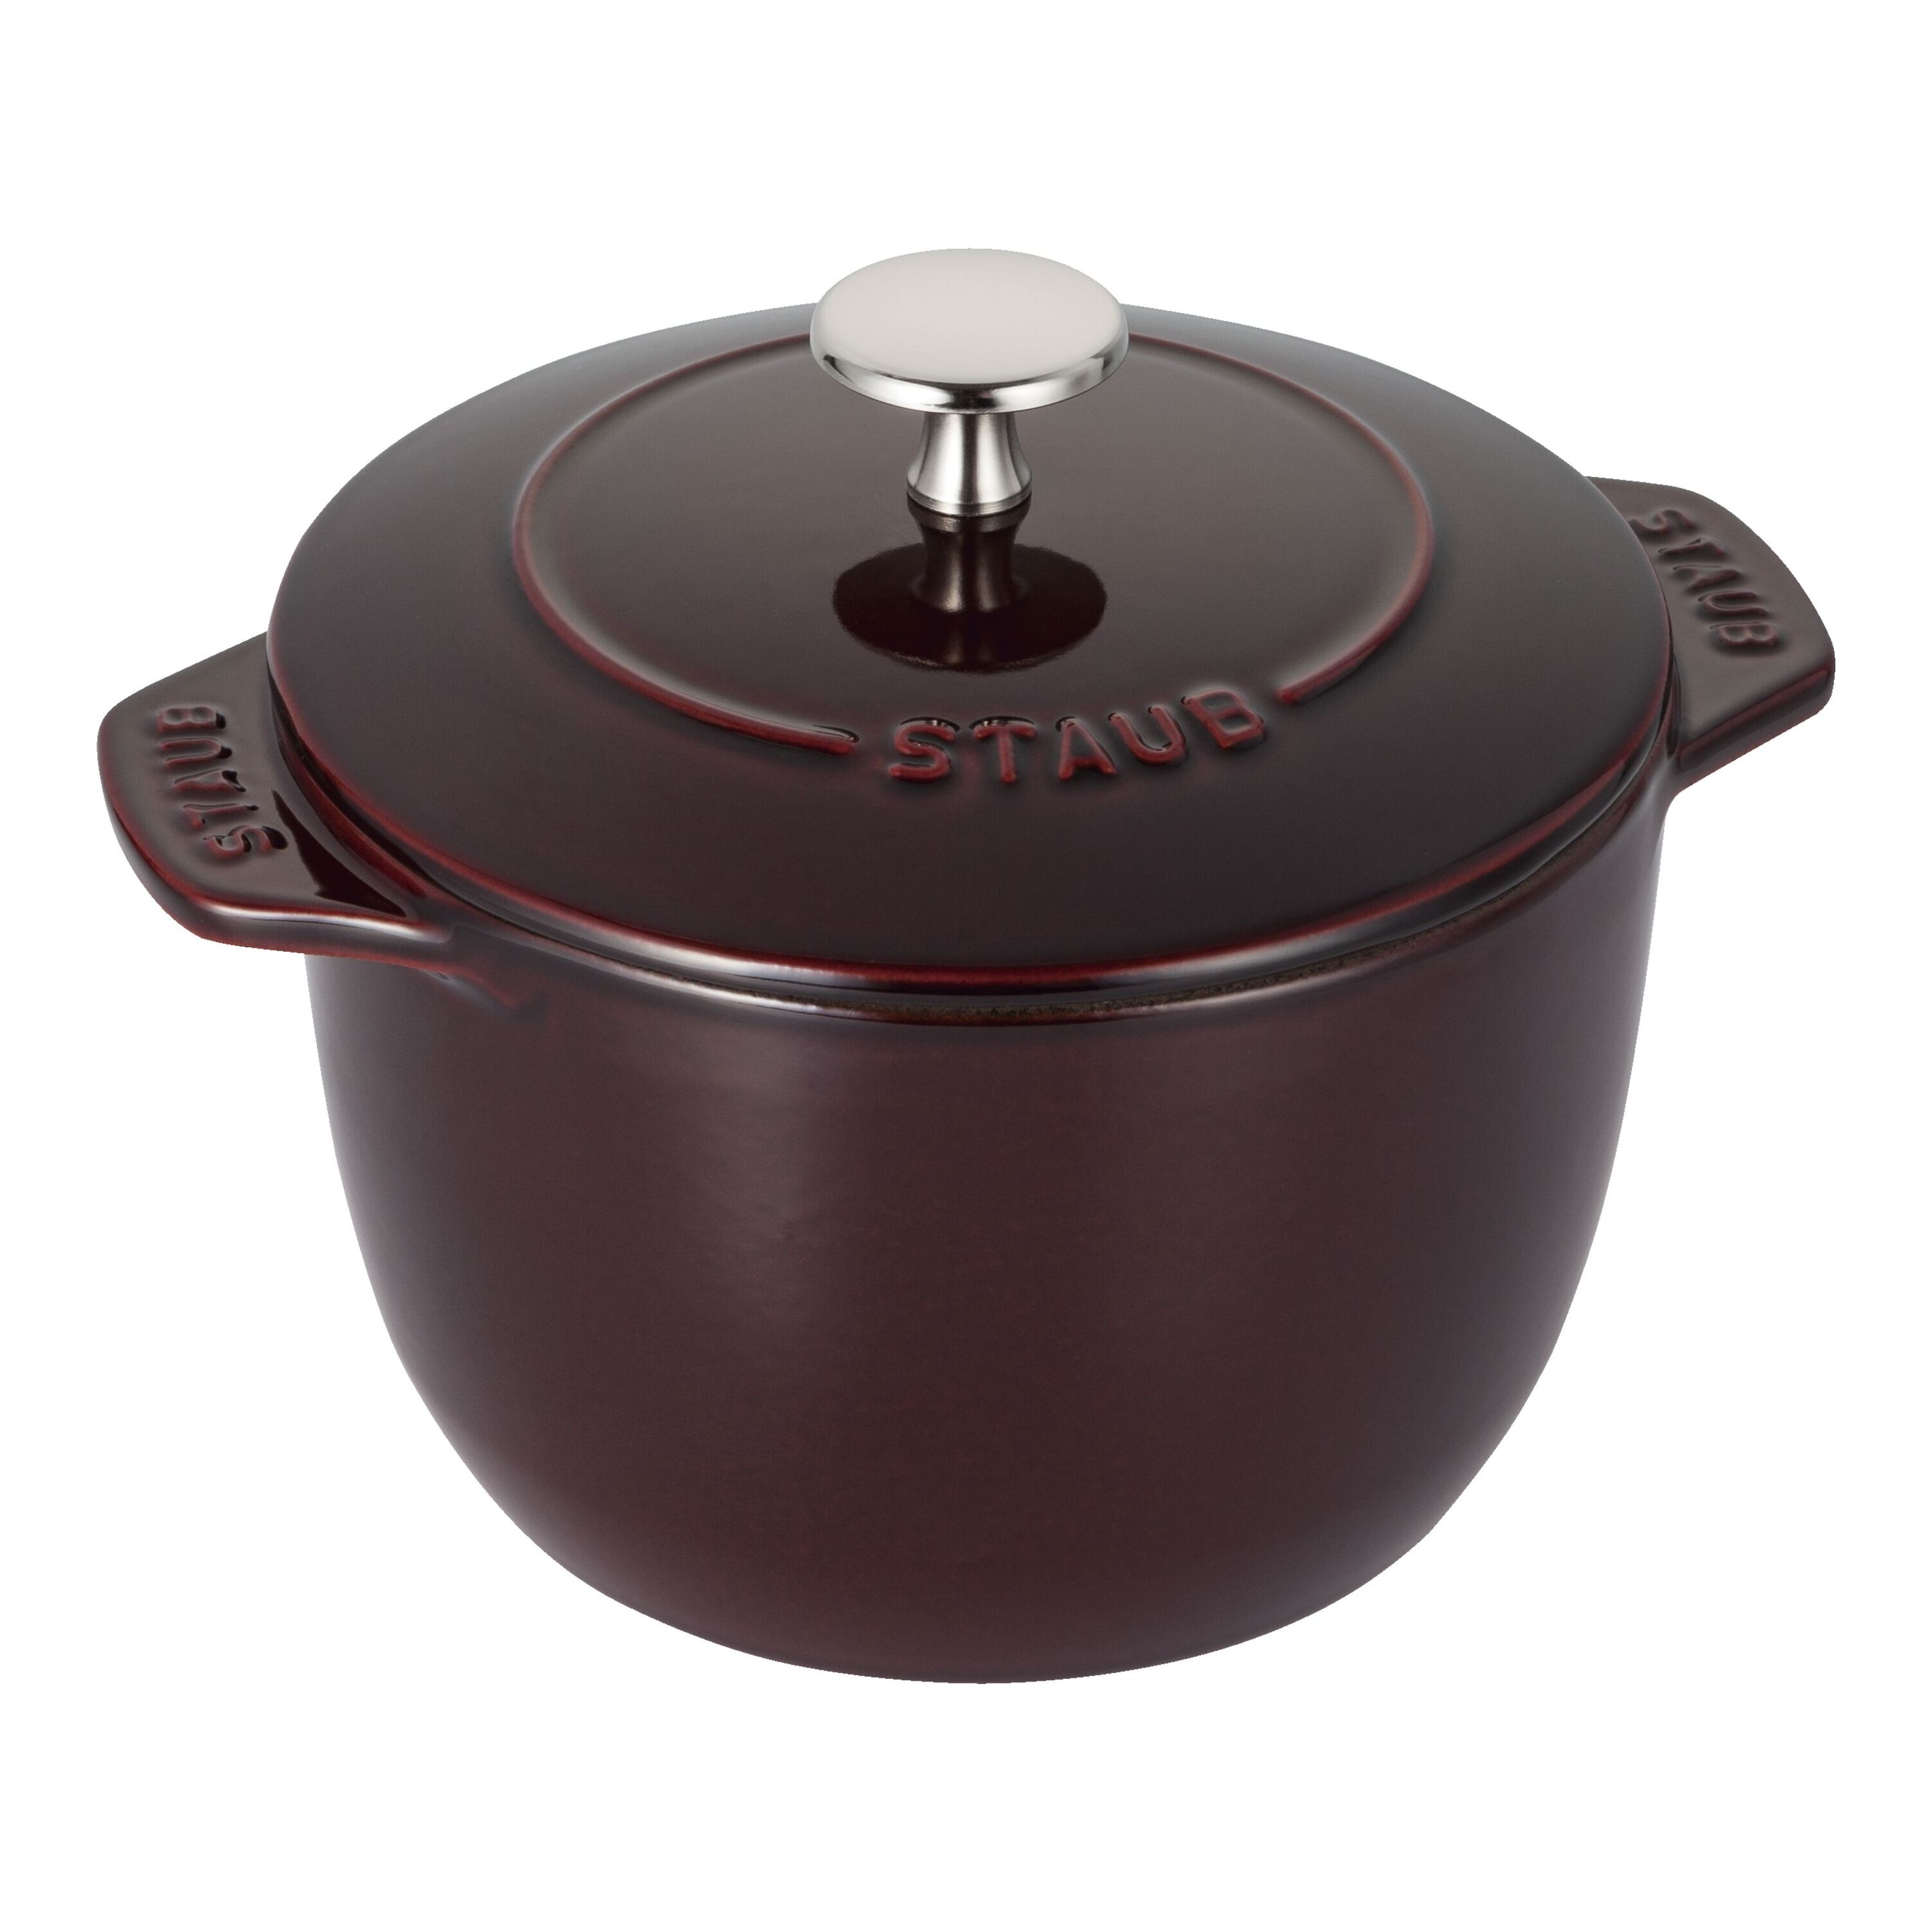 Buy Staub Cast Iron - Specialty Items Rice cocotte | ZWILLING.COM